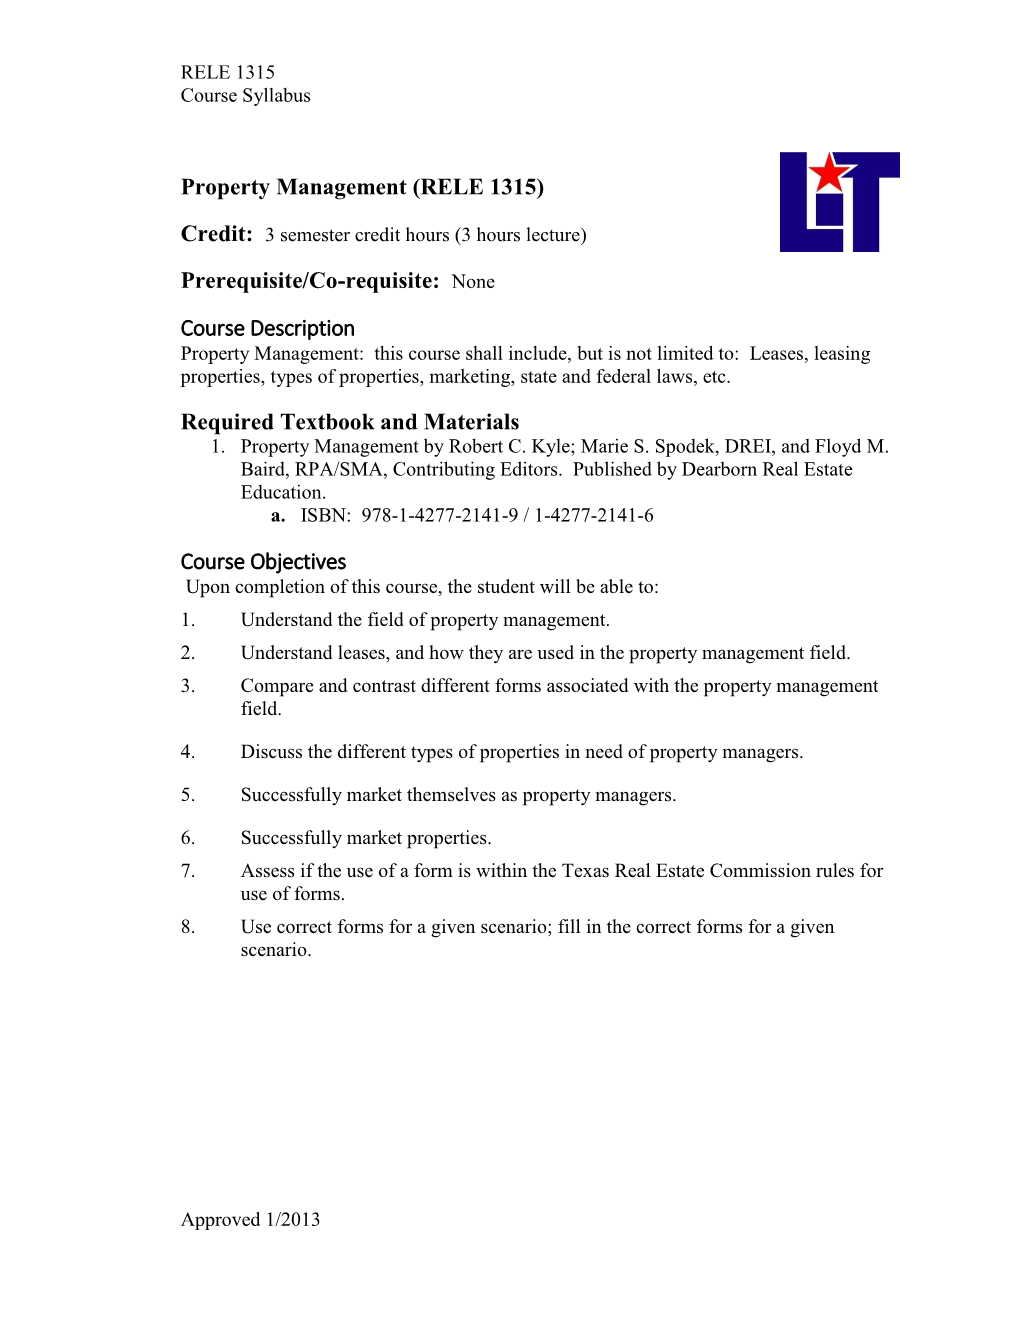 Property Management (RELE 1315) Prerequisite/Co-Requisite: None Course Description Required Textbook and Materials Course Objec